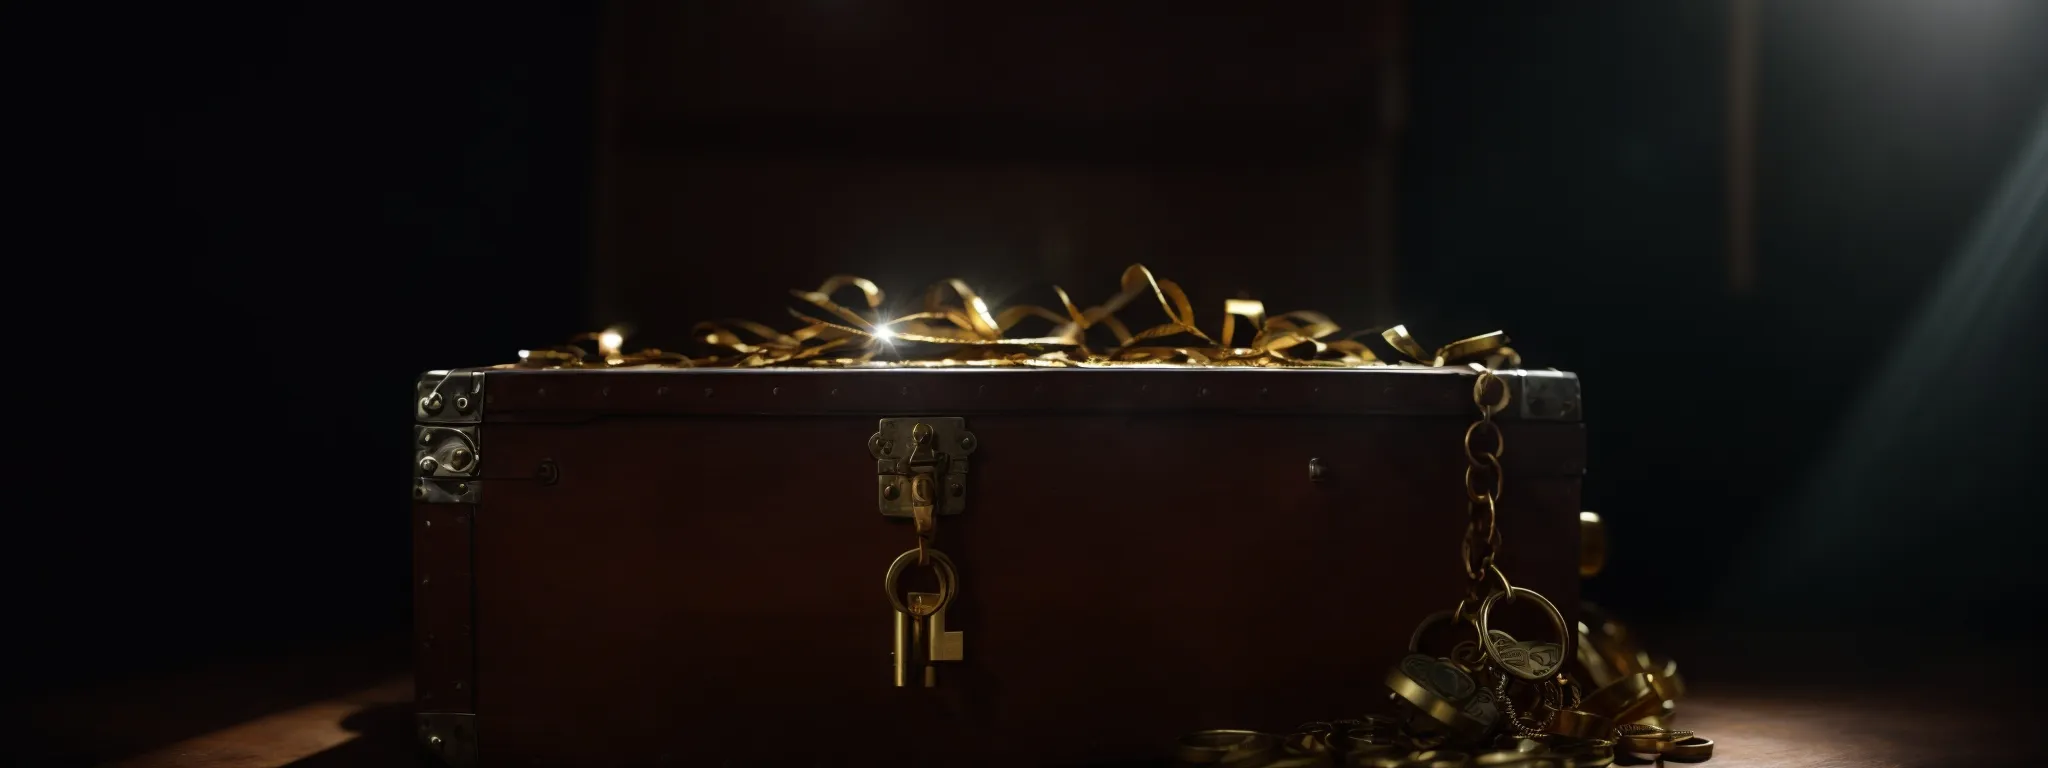 a locked treasure chest with a visible keyhole situated in a spotlight, hinting at valuable content within.